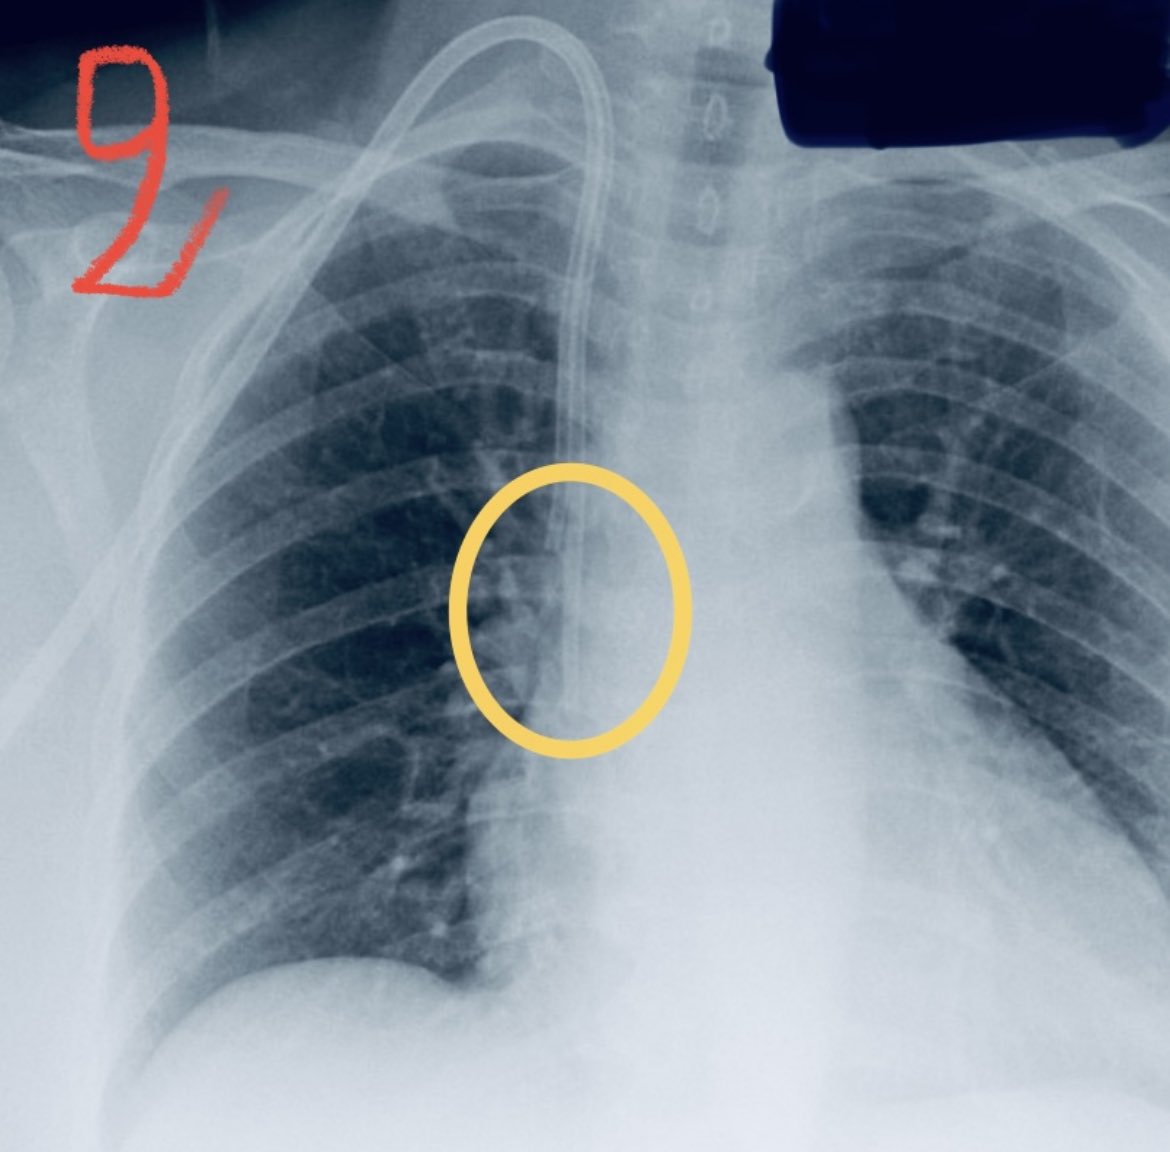 Which tip of Tunneled Dialysis Catheter is in correct position 1 or 2? #nephrologytwitter @Medtwitteer @CriticalCareRN_ @RadiologySigns @RadiologyACR